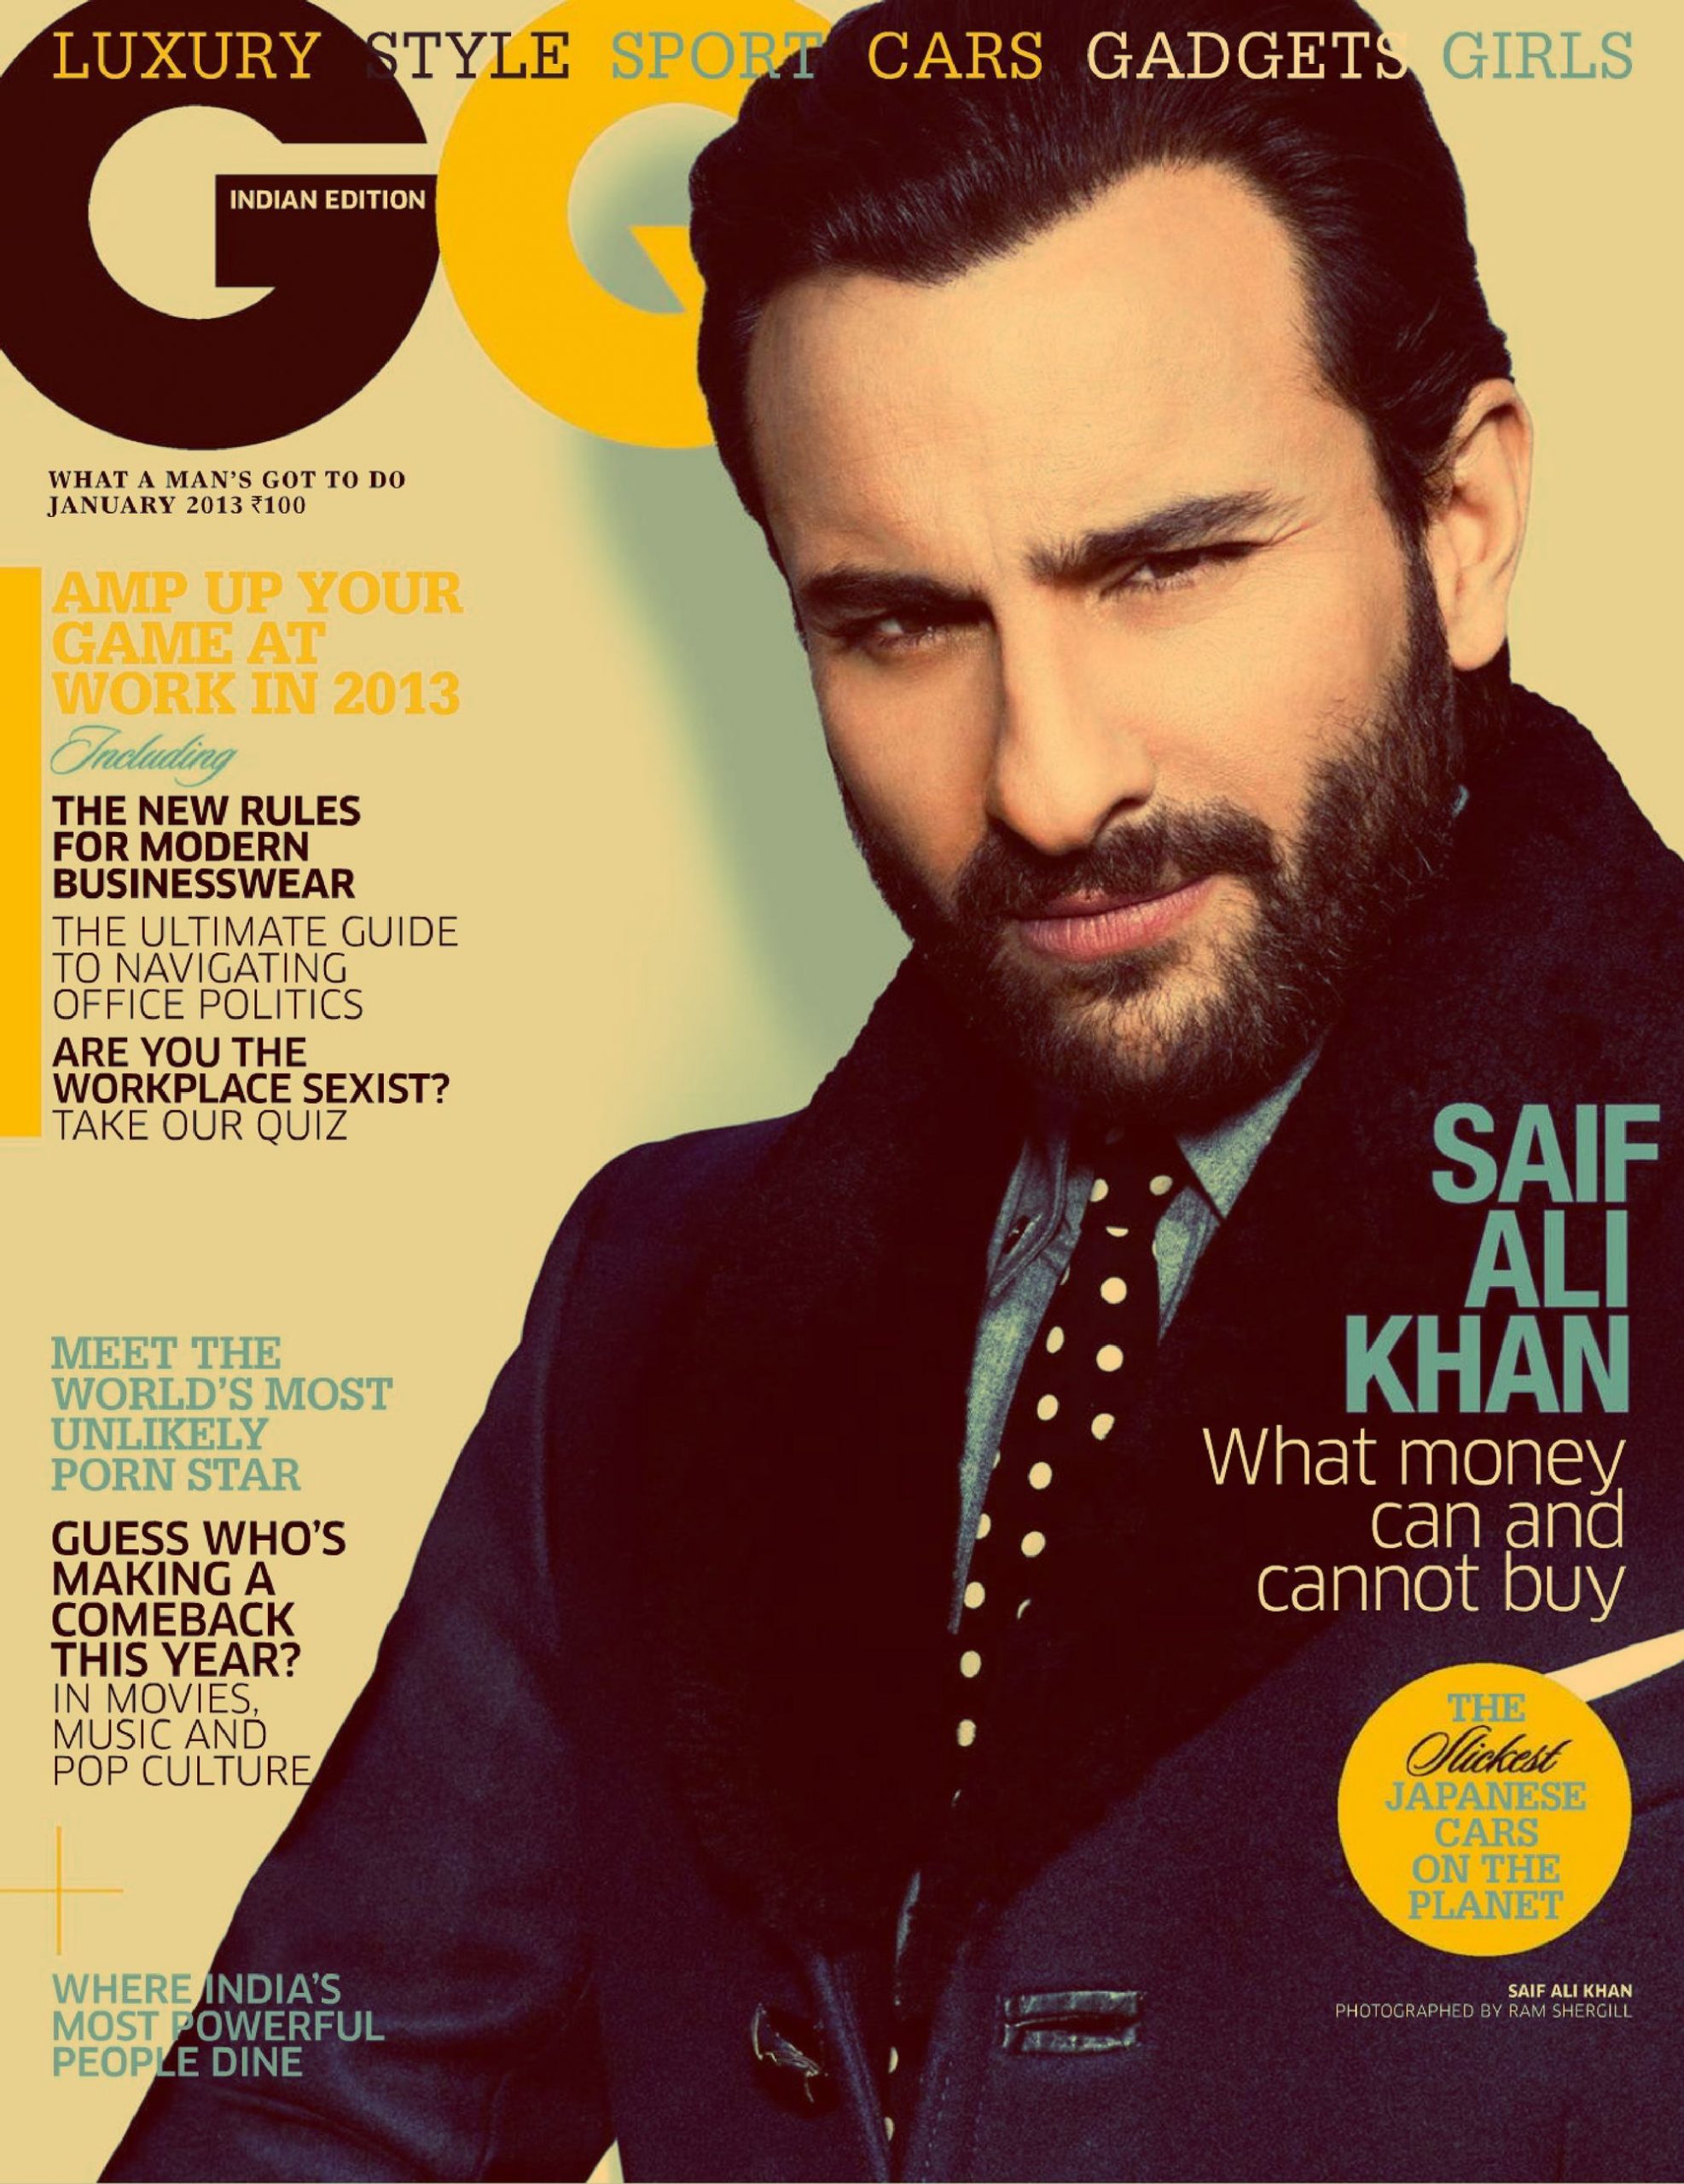 Saif Ali Khan on the cover of GQ India's January 2013 issue